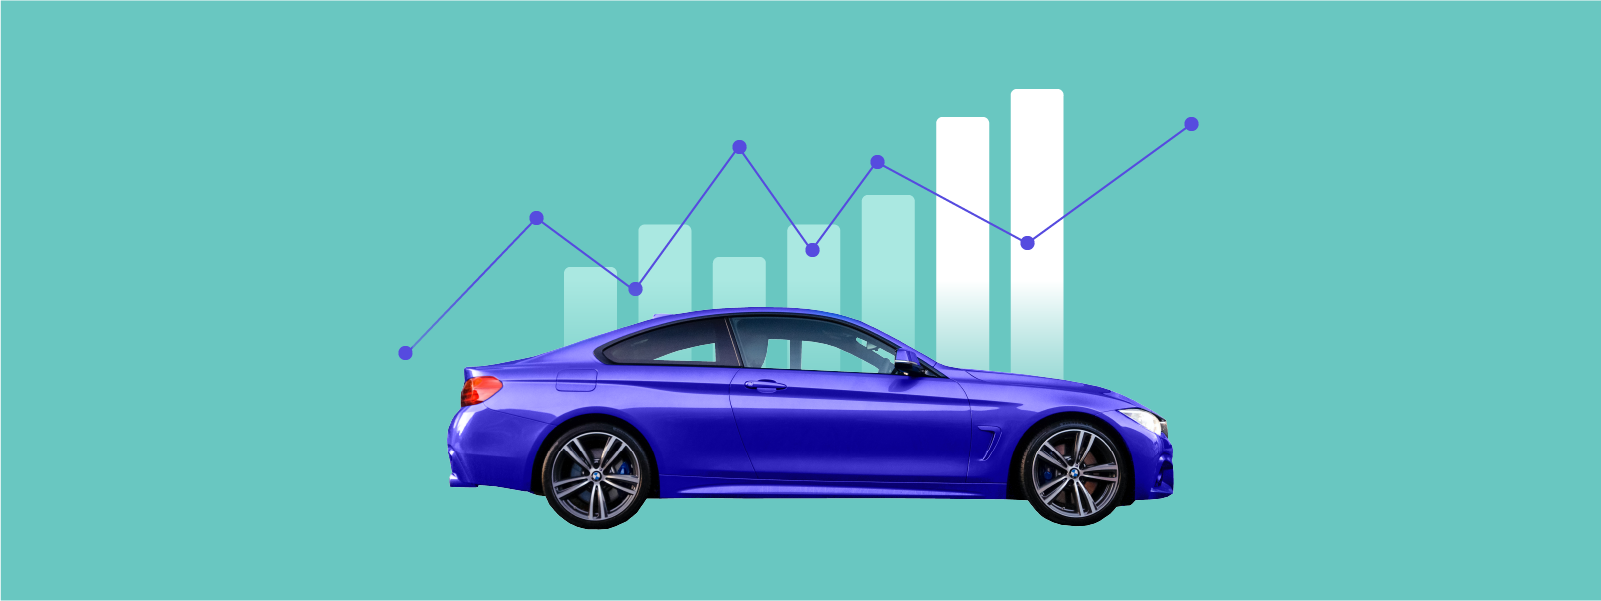 purple car in front of a line and bar graph